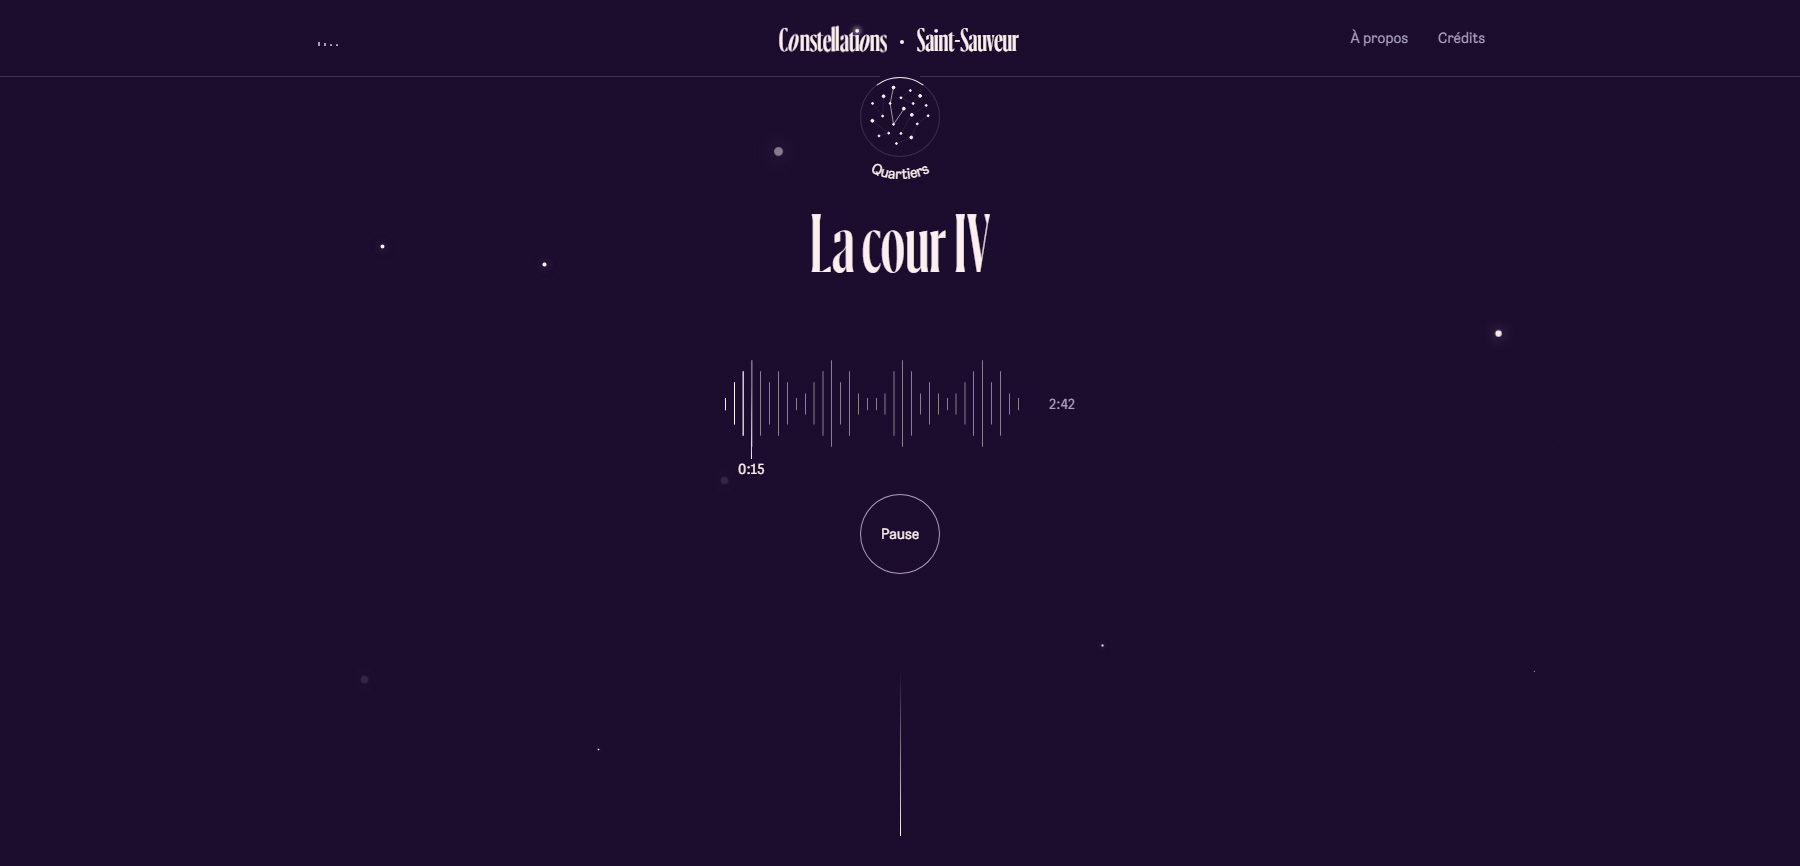 Constellations - Website of the Day